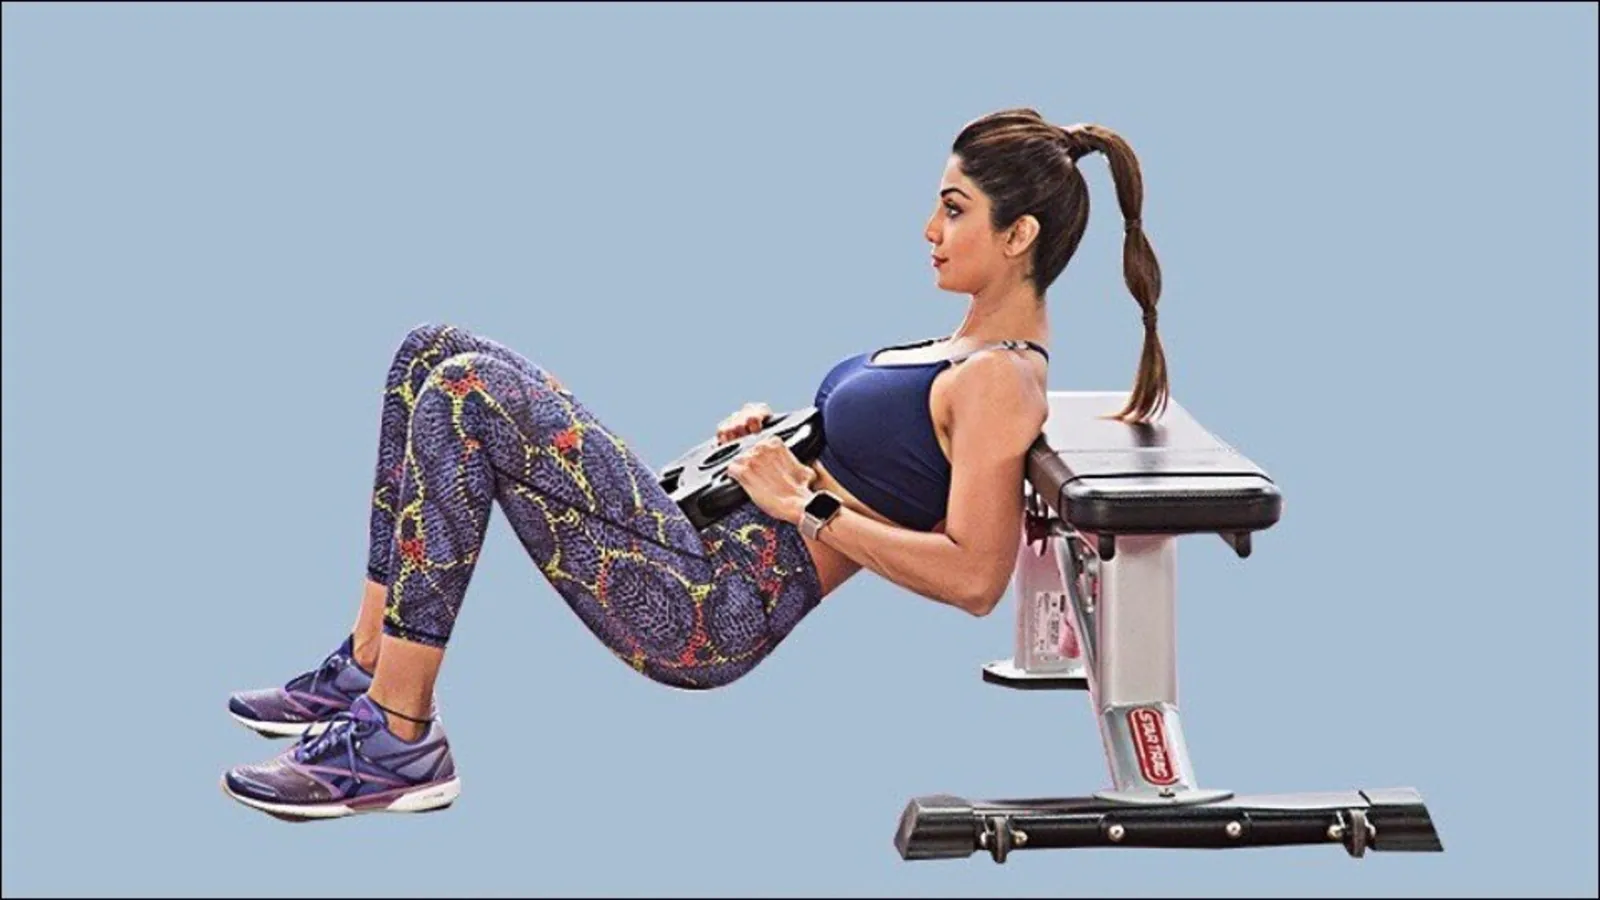 Monday motivation: Shilpa Shetty’s ‘pull-ups, push-ups and lunges’ inside a bus is perfect fitness inspo